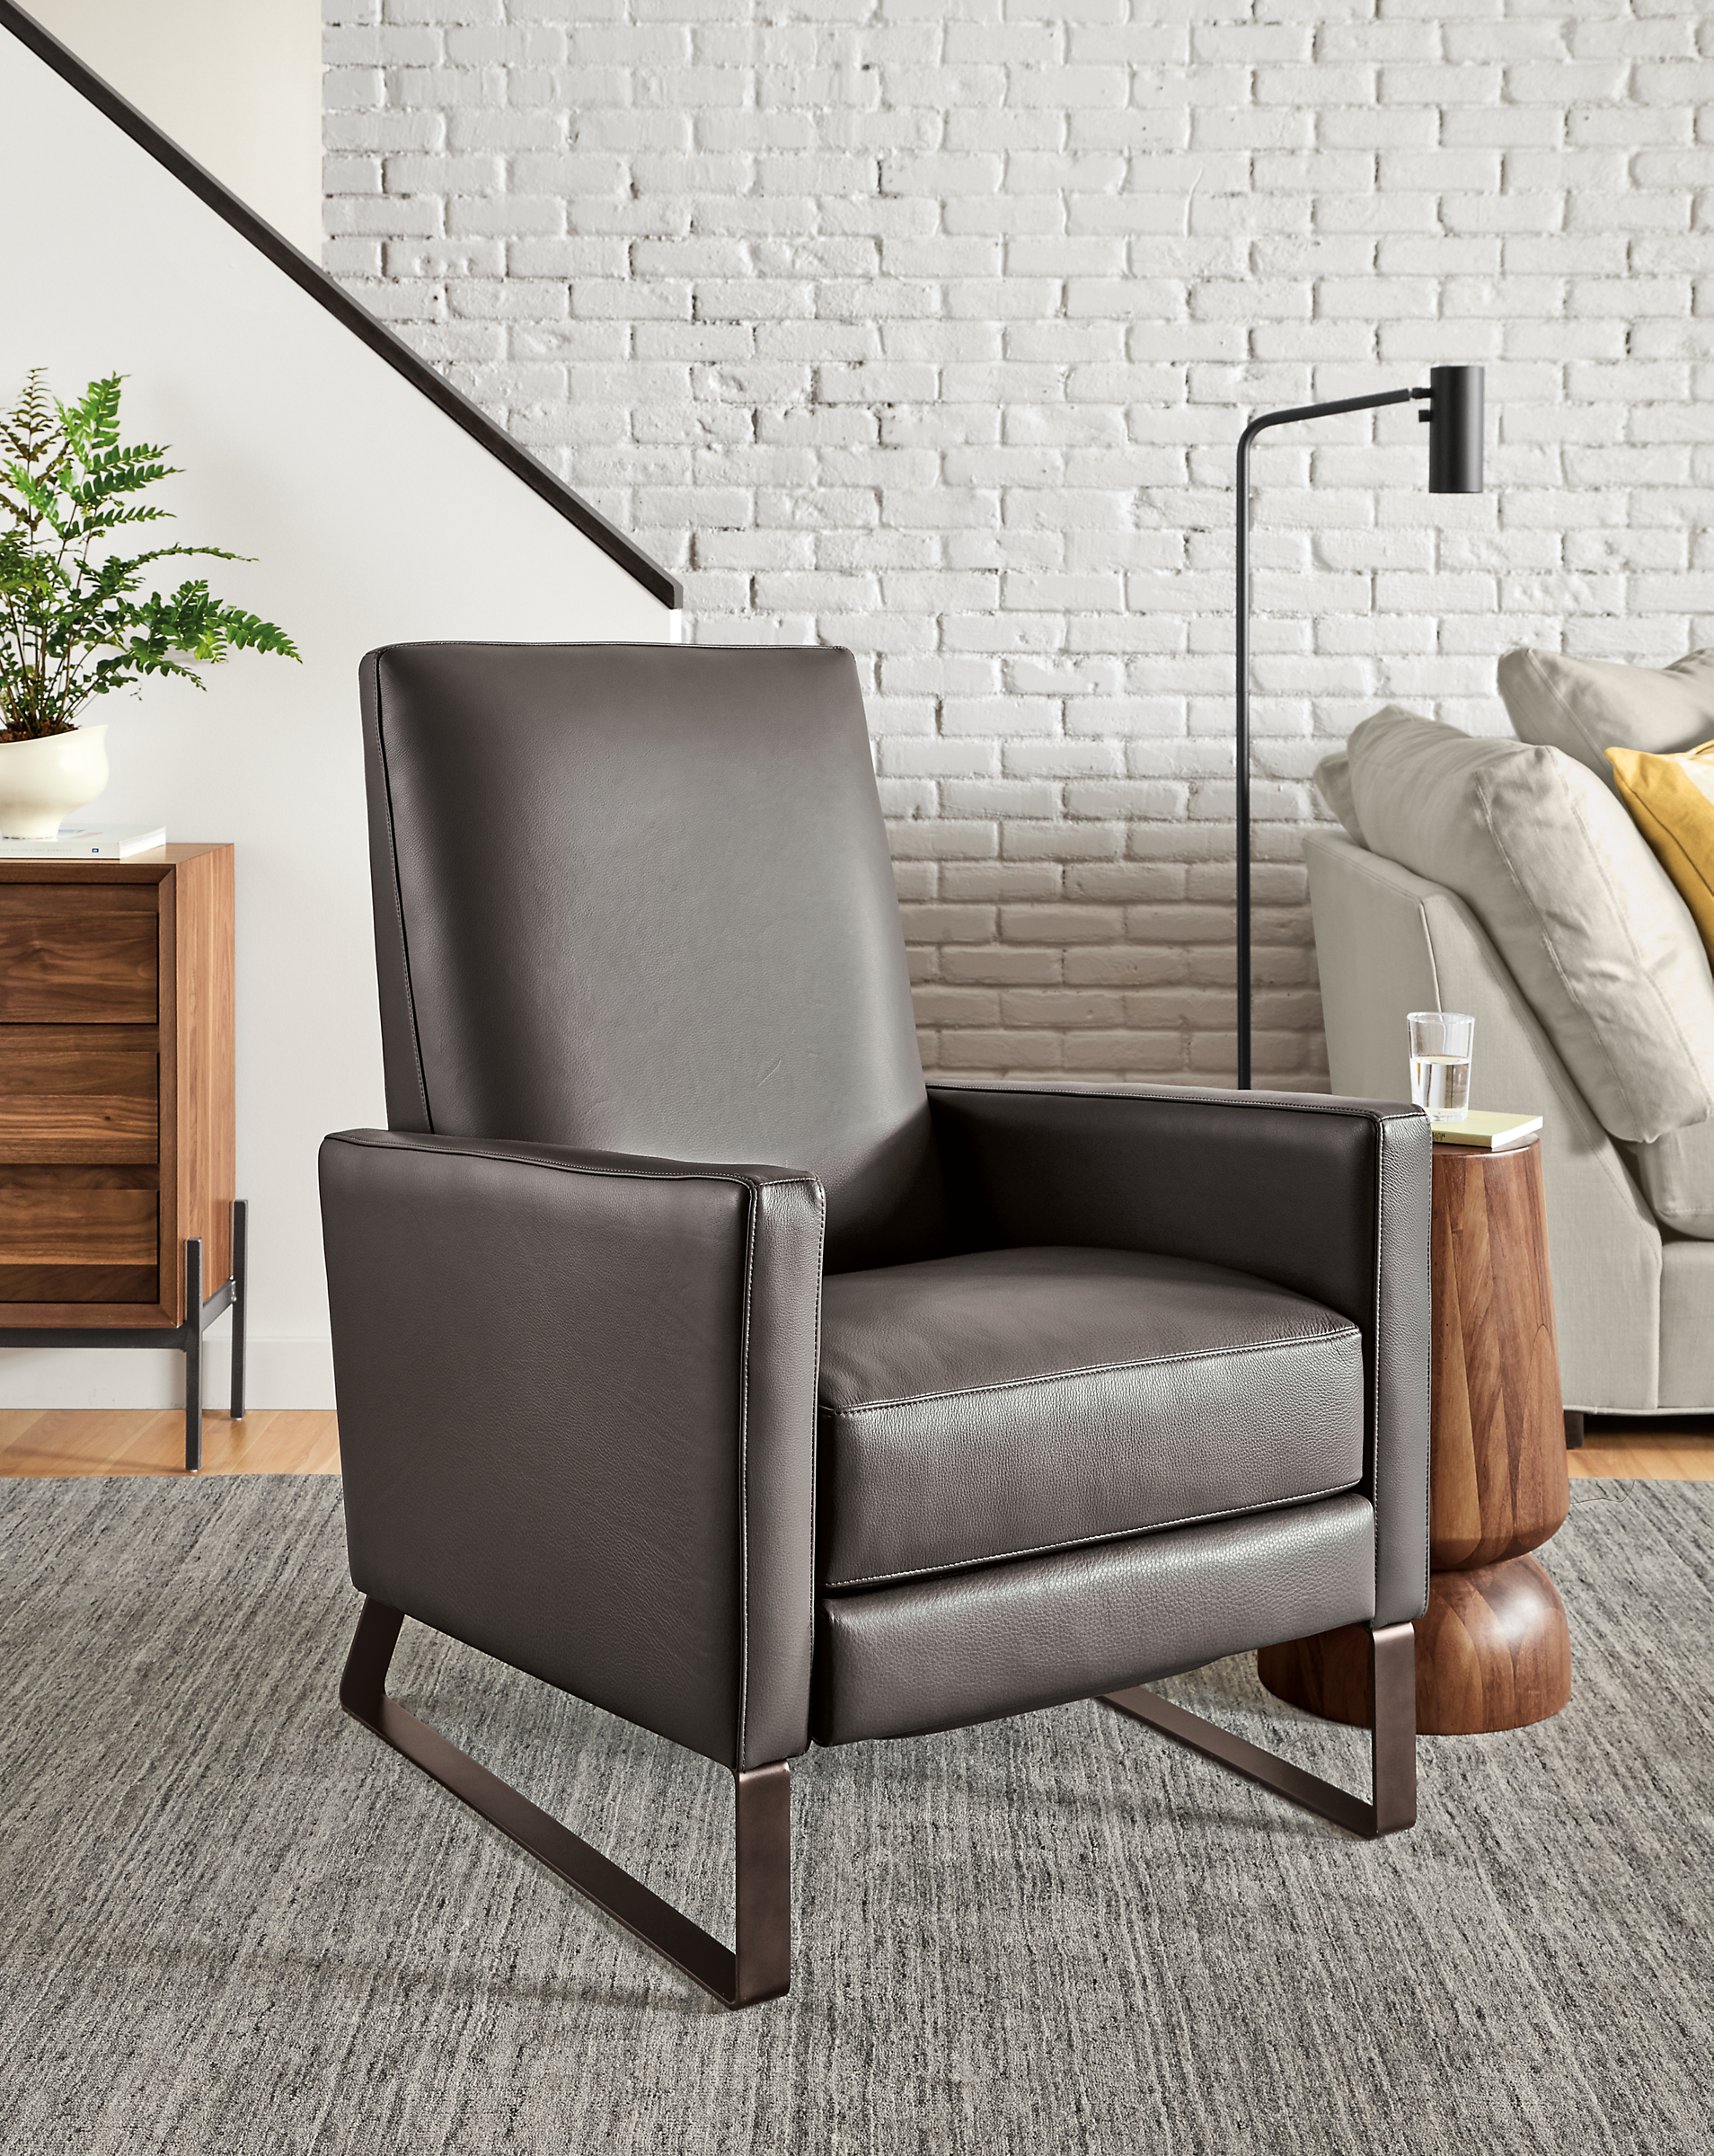 Detail of Arlo Thin-Arm Recliner in Urbino Smoke Leather with steel sled  base.